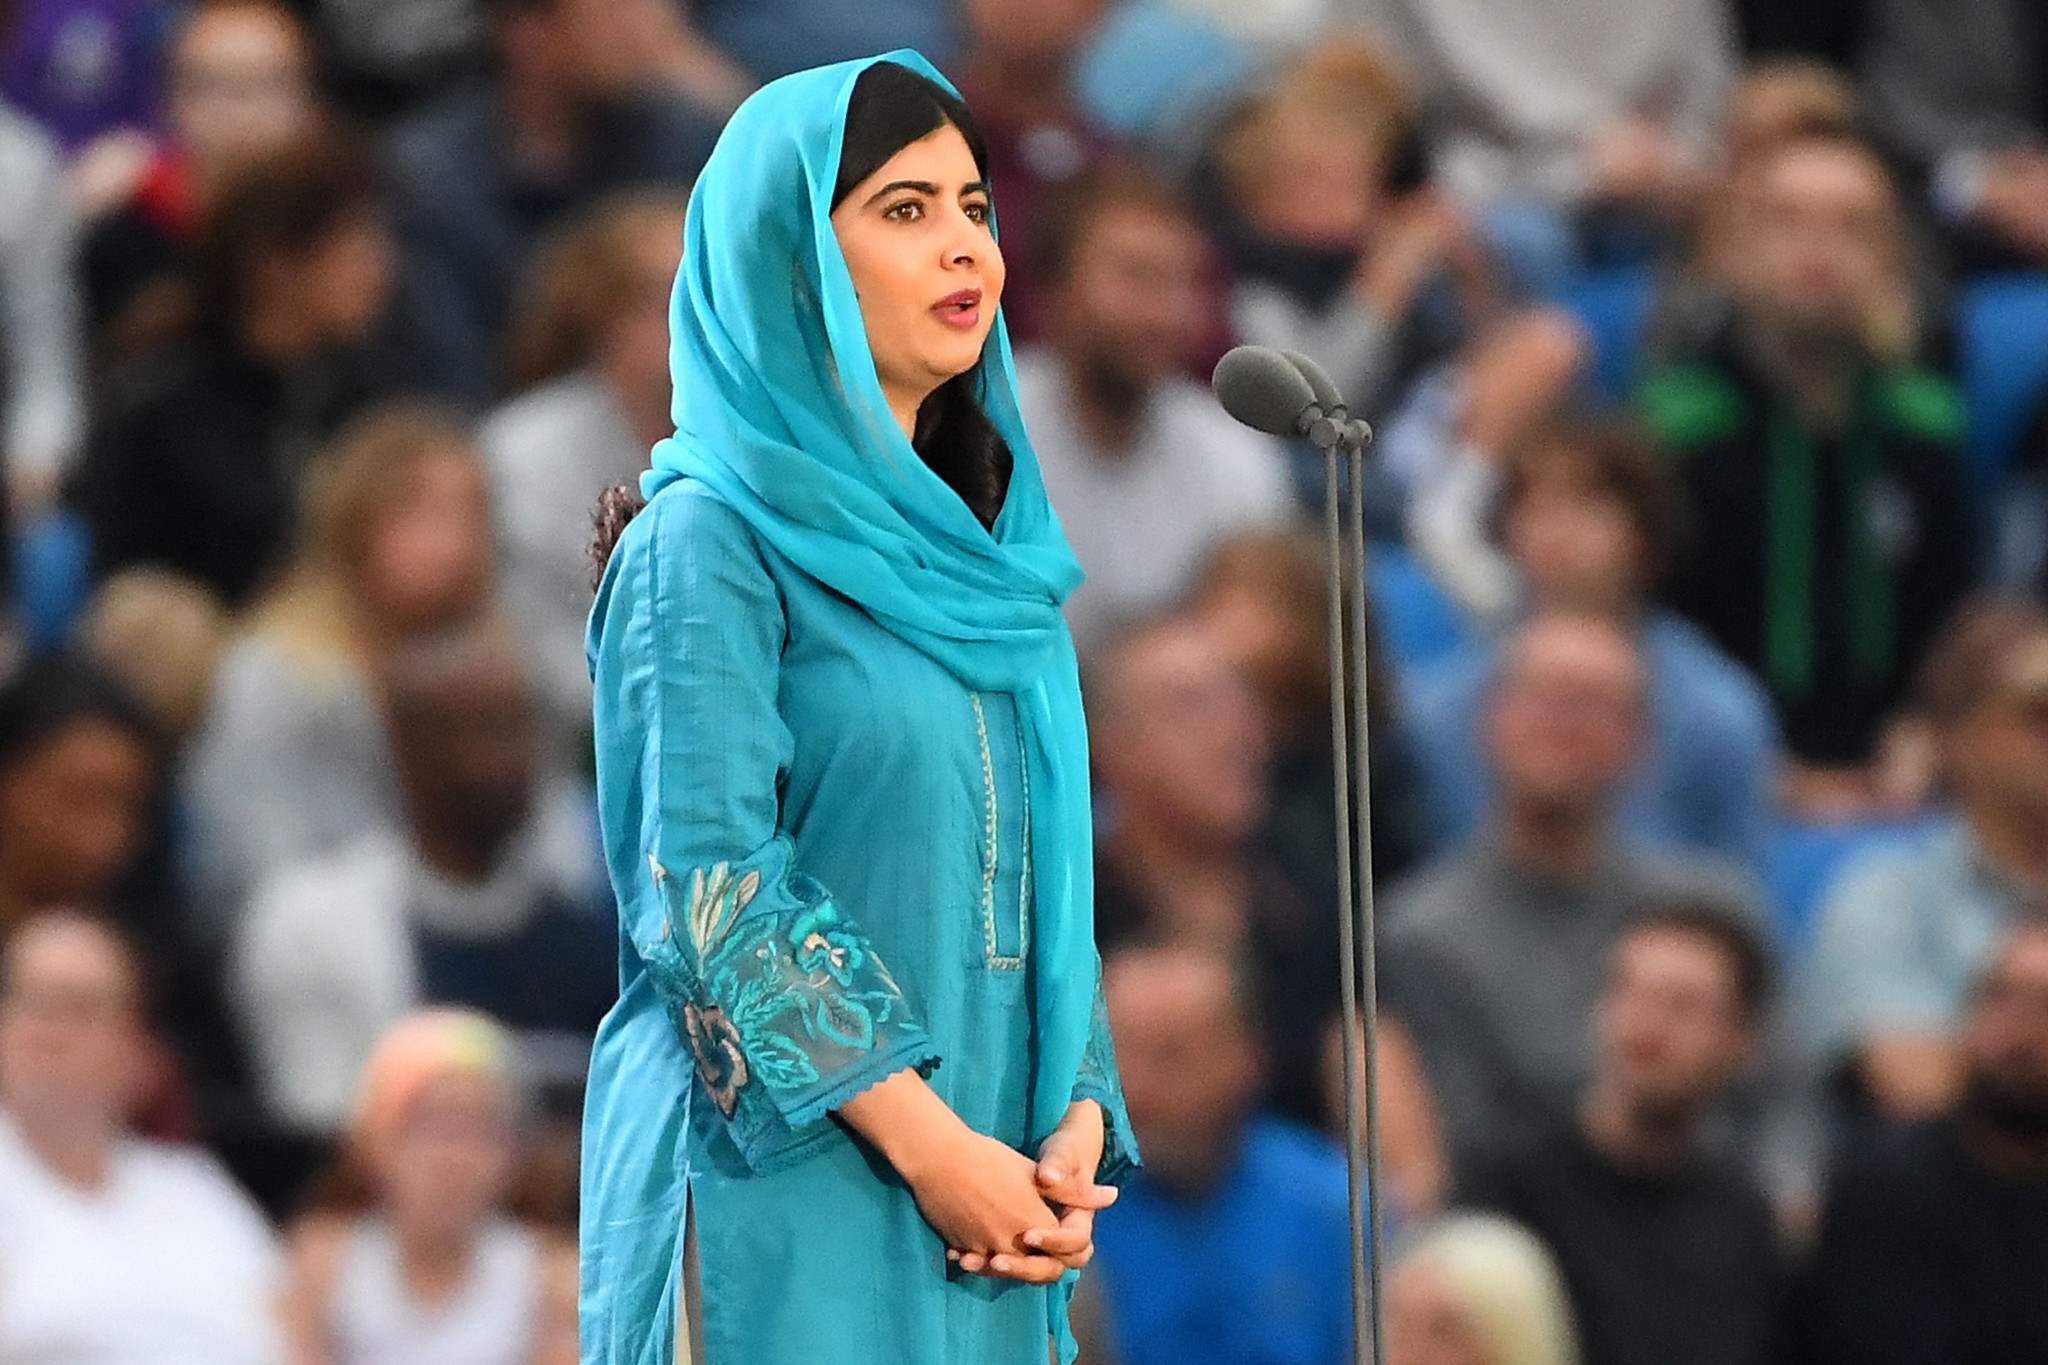 Female education activist Malala Yousafzai spoke at the Alexander Stadium, with her words inspiring part of the Opening Ceremony ©Getty Images